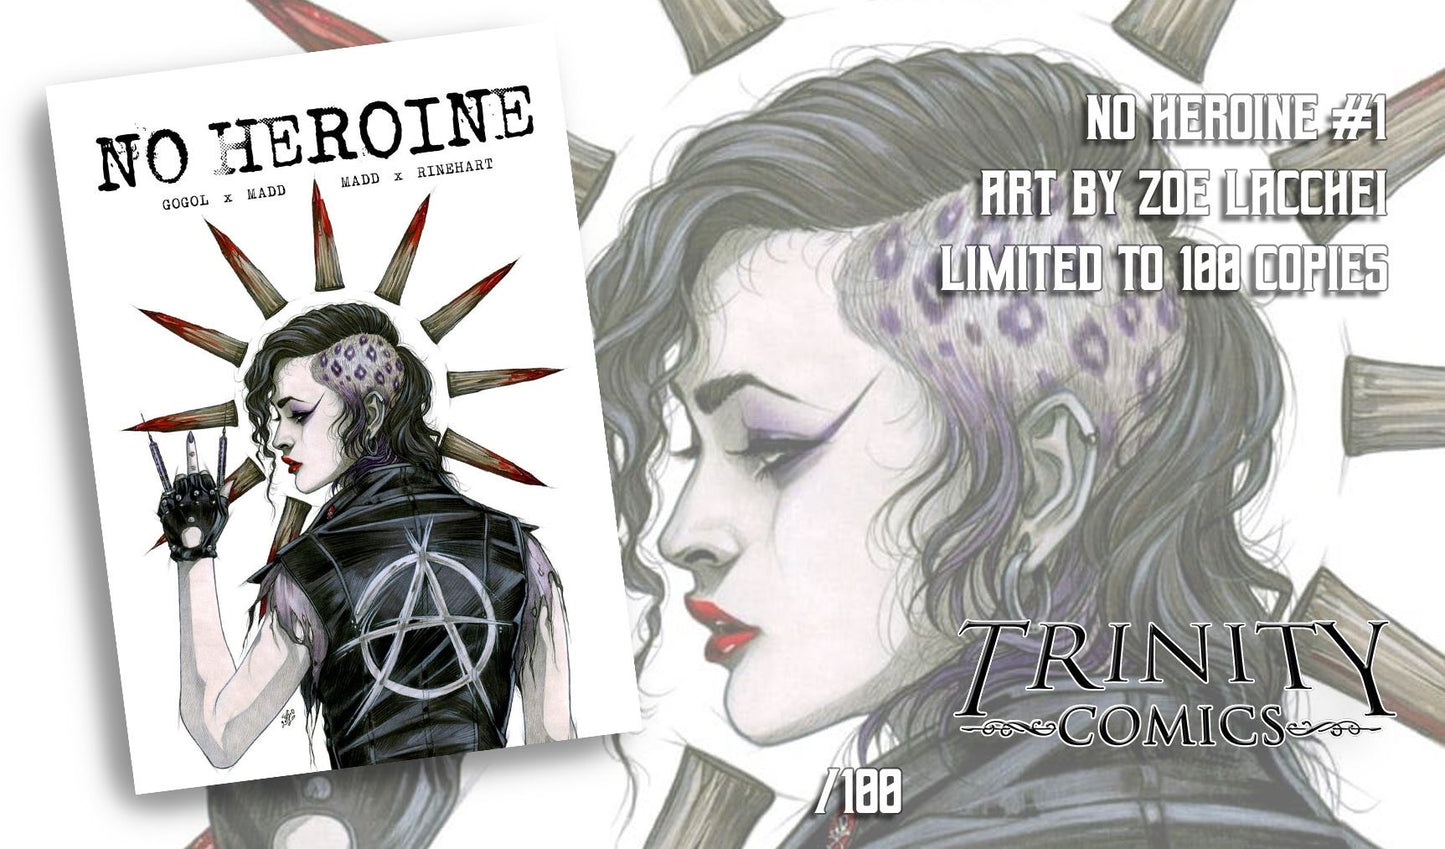 No Heroine #1 Trinity Comics Exclusive Cover by Zoe Lacchei